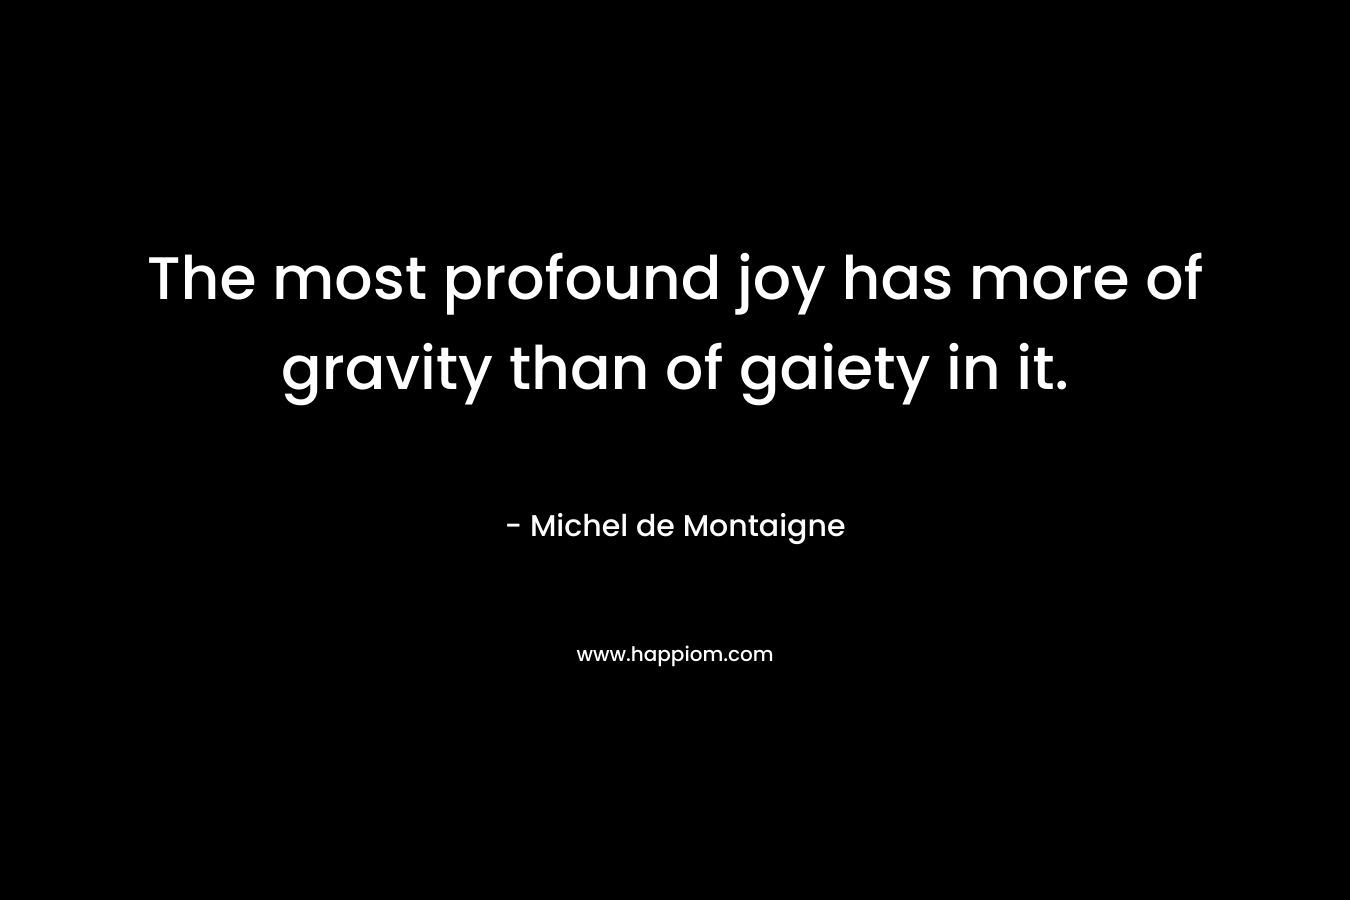 The most profound joy has more of gravity than of gaiety in it.